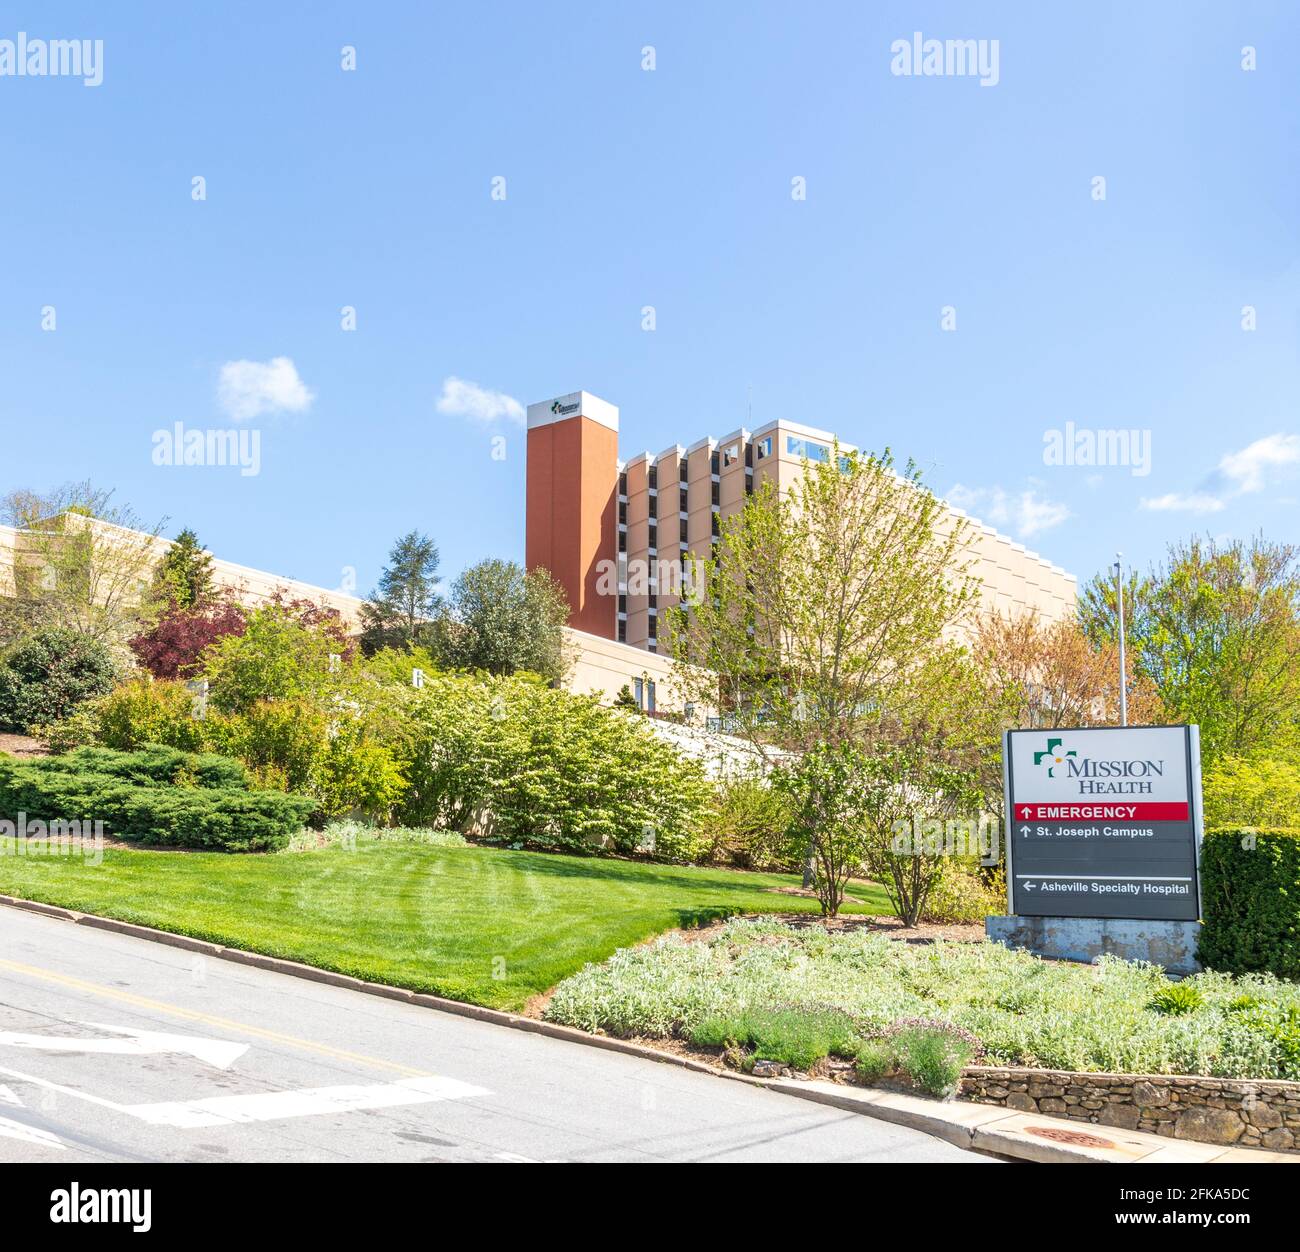 ASHEVILLE, NC, USA-25 APRIL 2021: Mission Health Emergency entrance, St. Joseph Campus, Asheville Specialty Hospital.  Information sign and building. Stock Photo